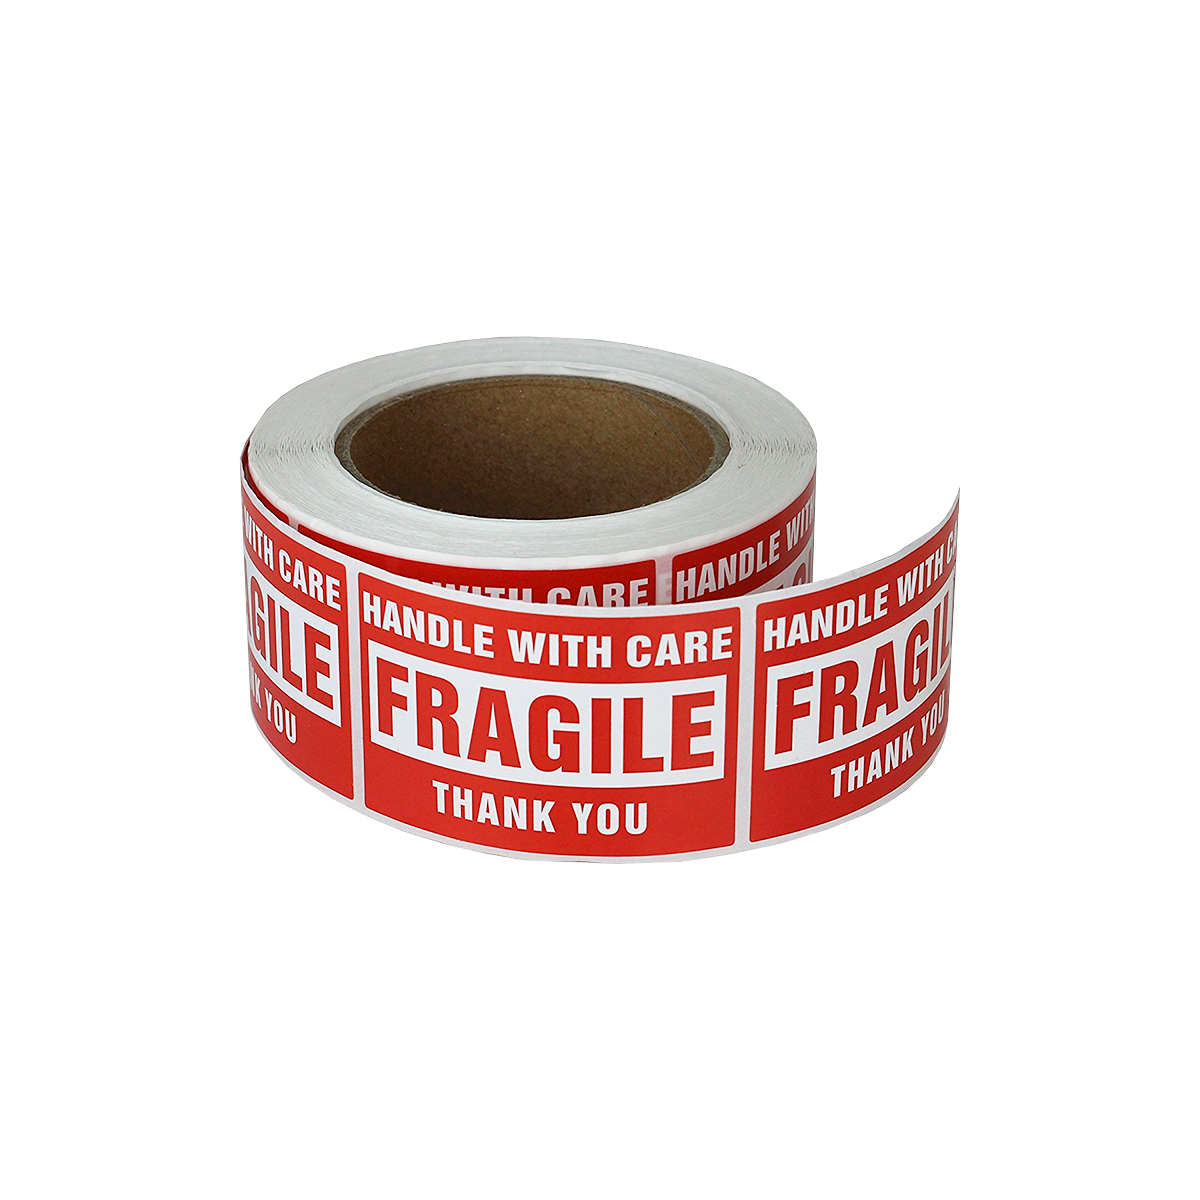 Fragile 10 Rolls/5000 Labels,Handle with Care 2 x 3 Thank You Red Warning Shipping Label Stickers